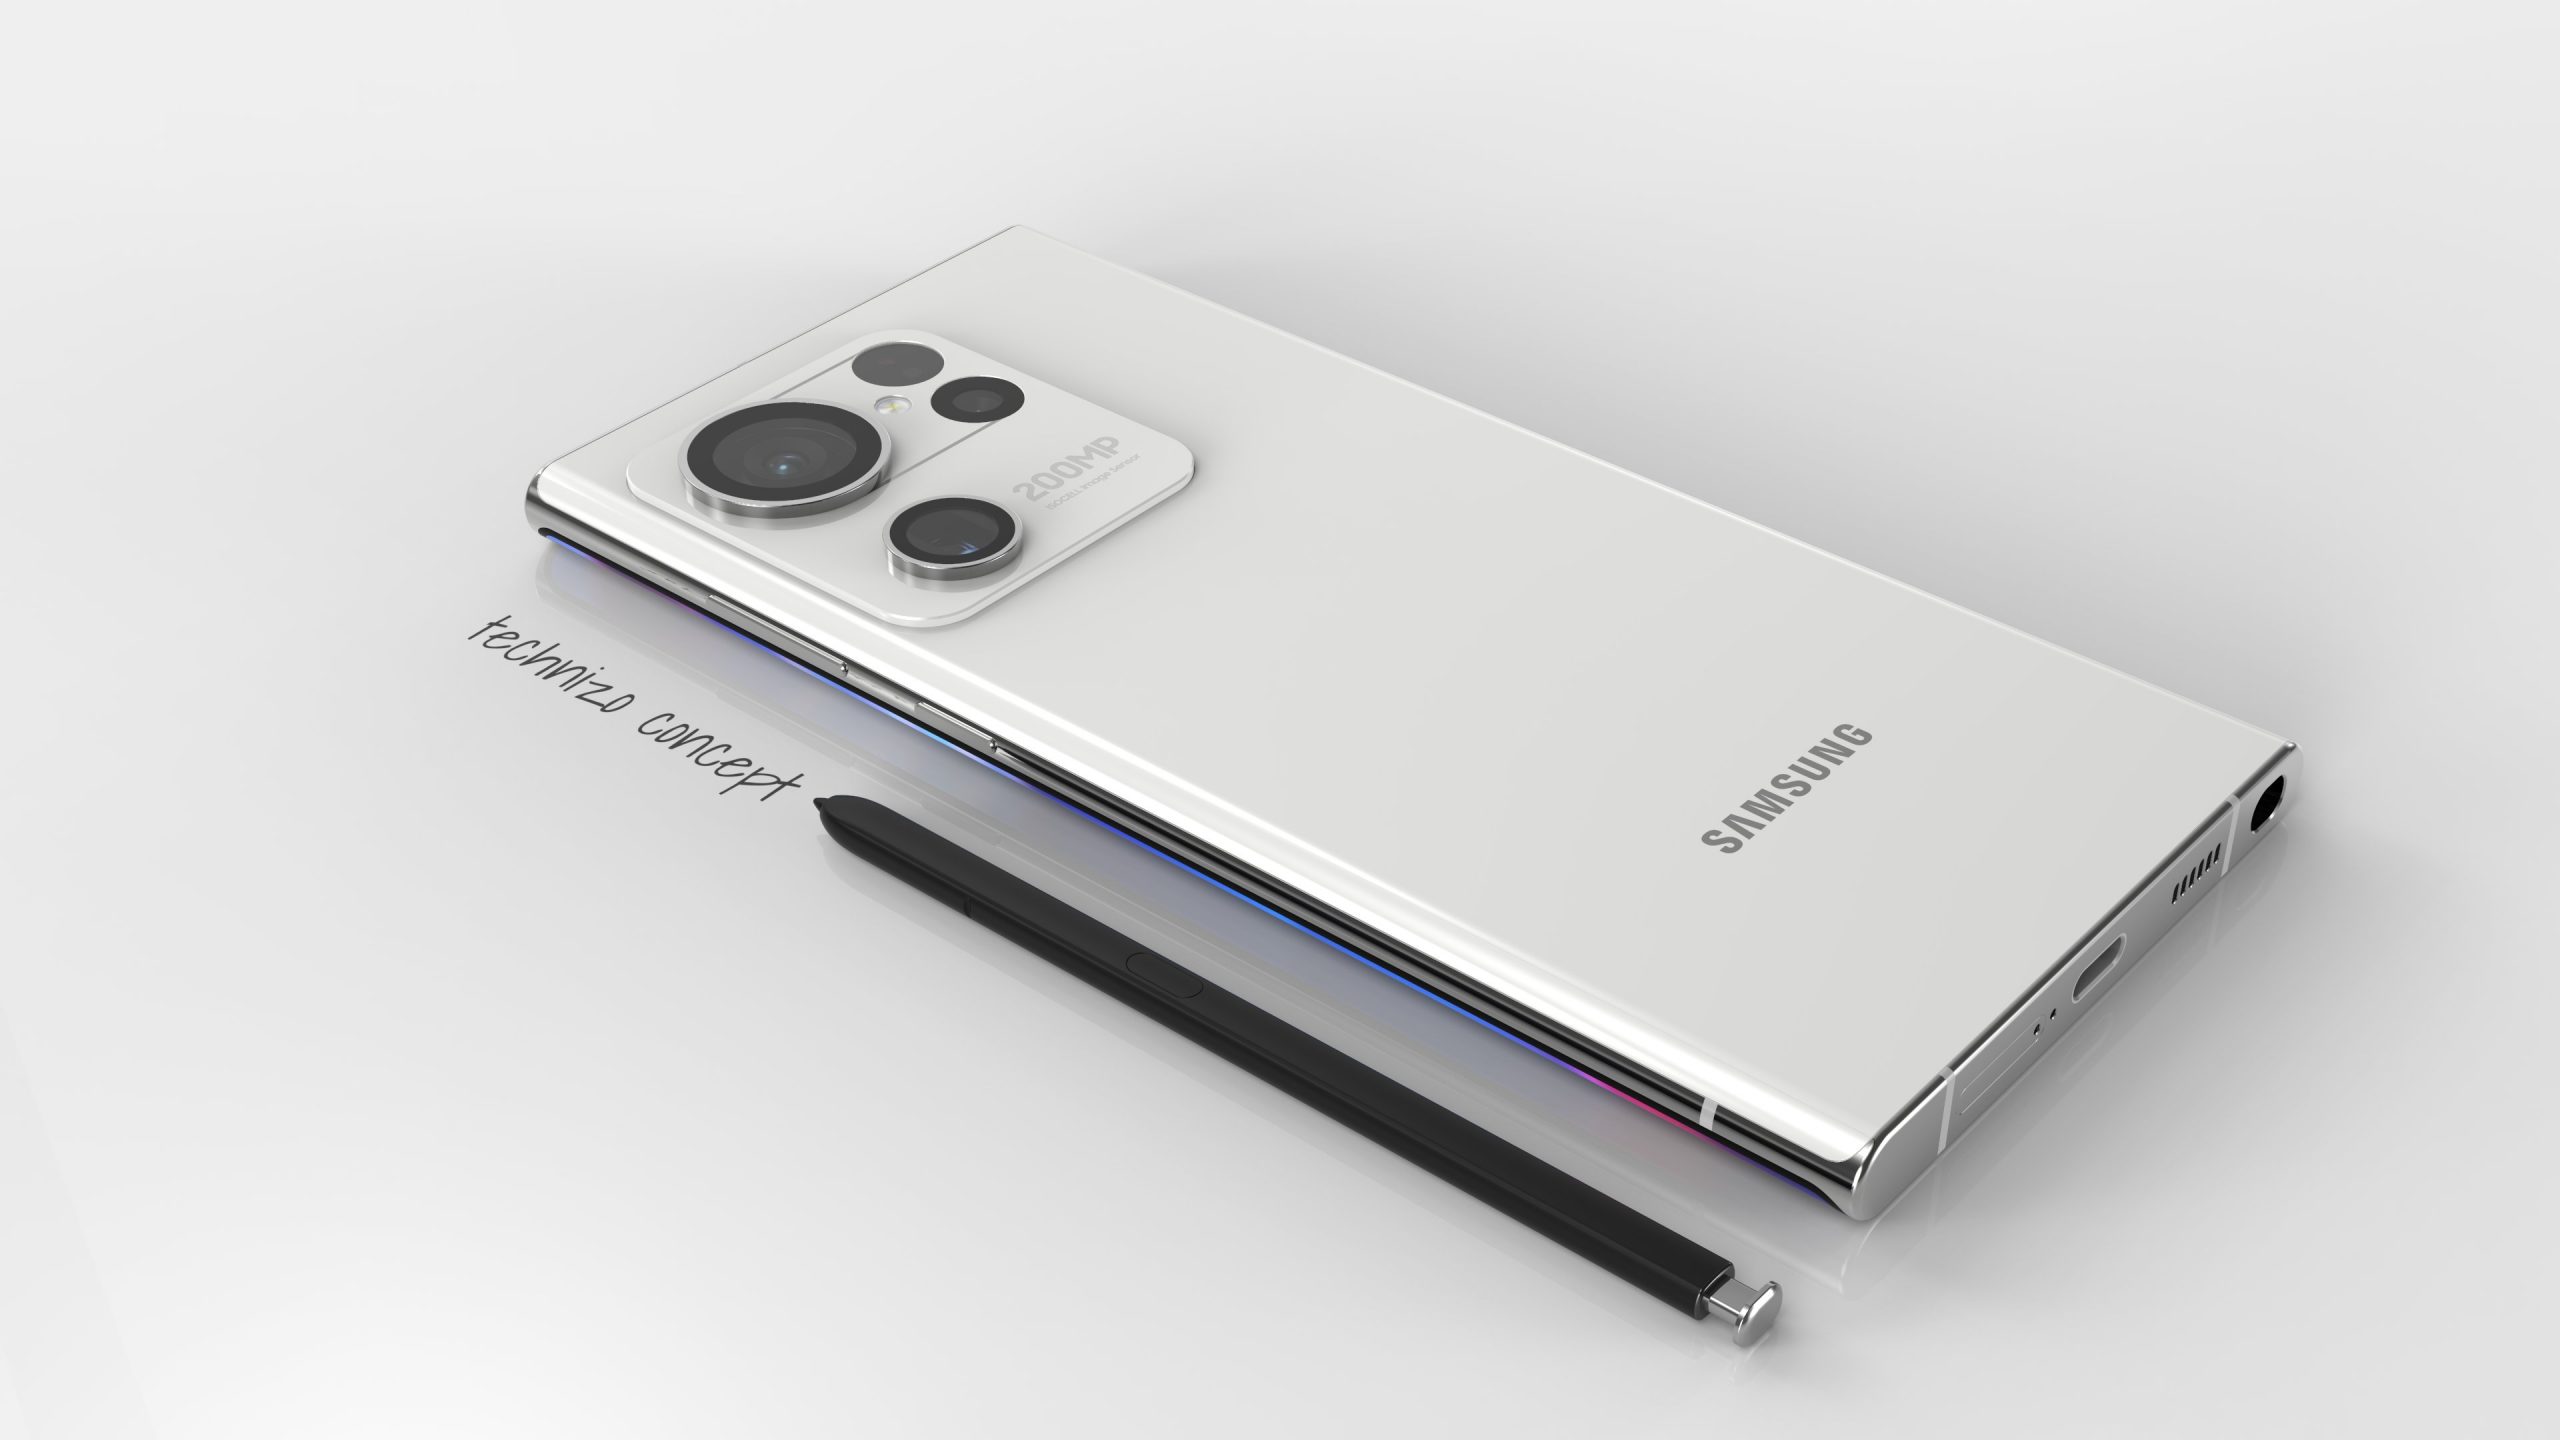 Samsung Galaxy S23 Ultra likely to get a 200MP camera